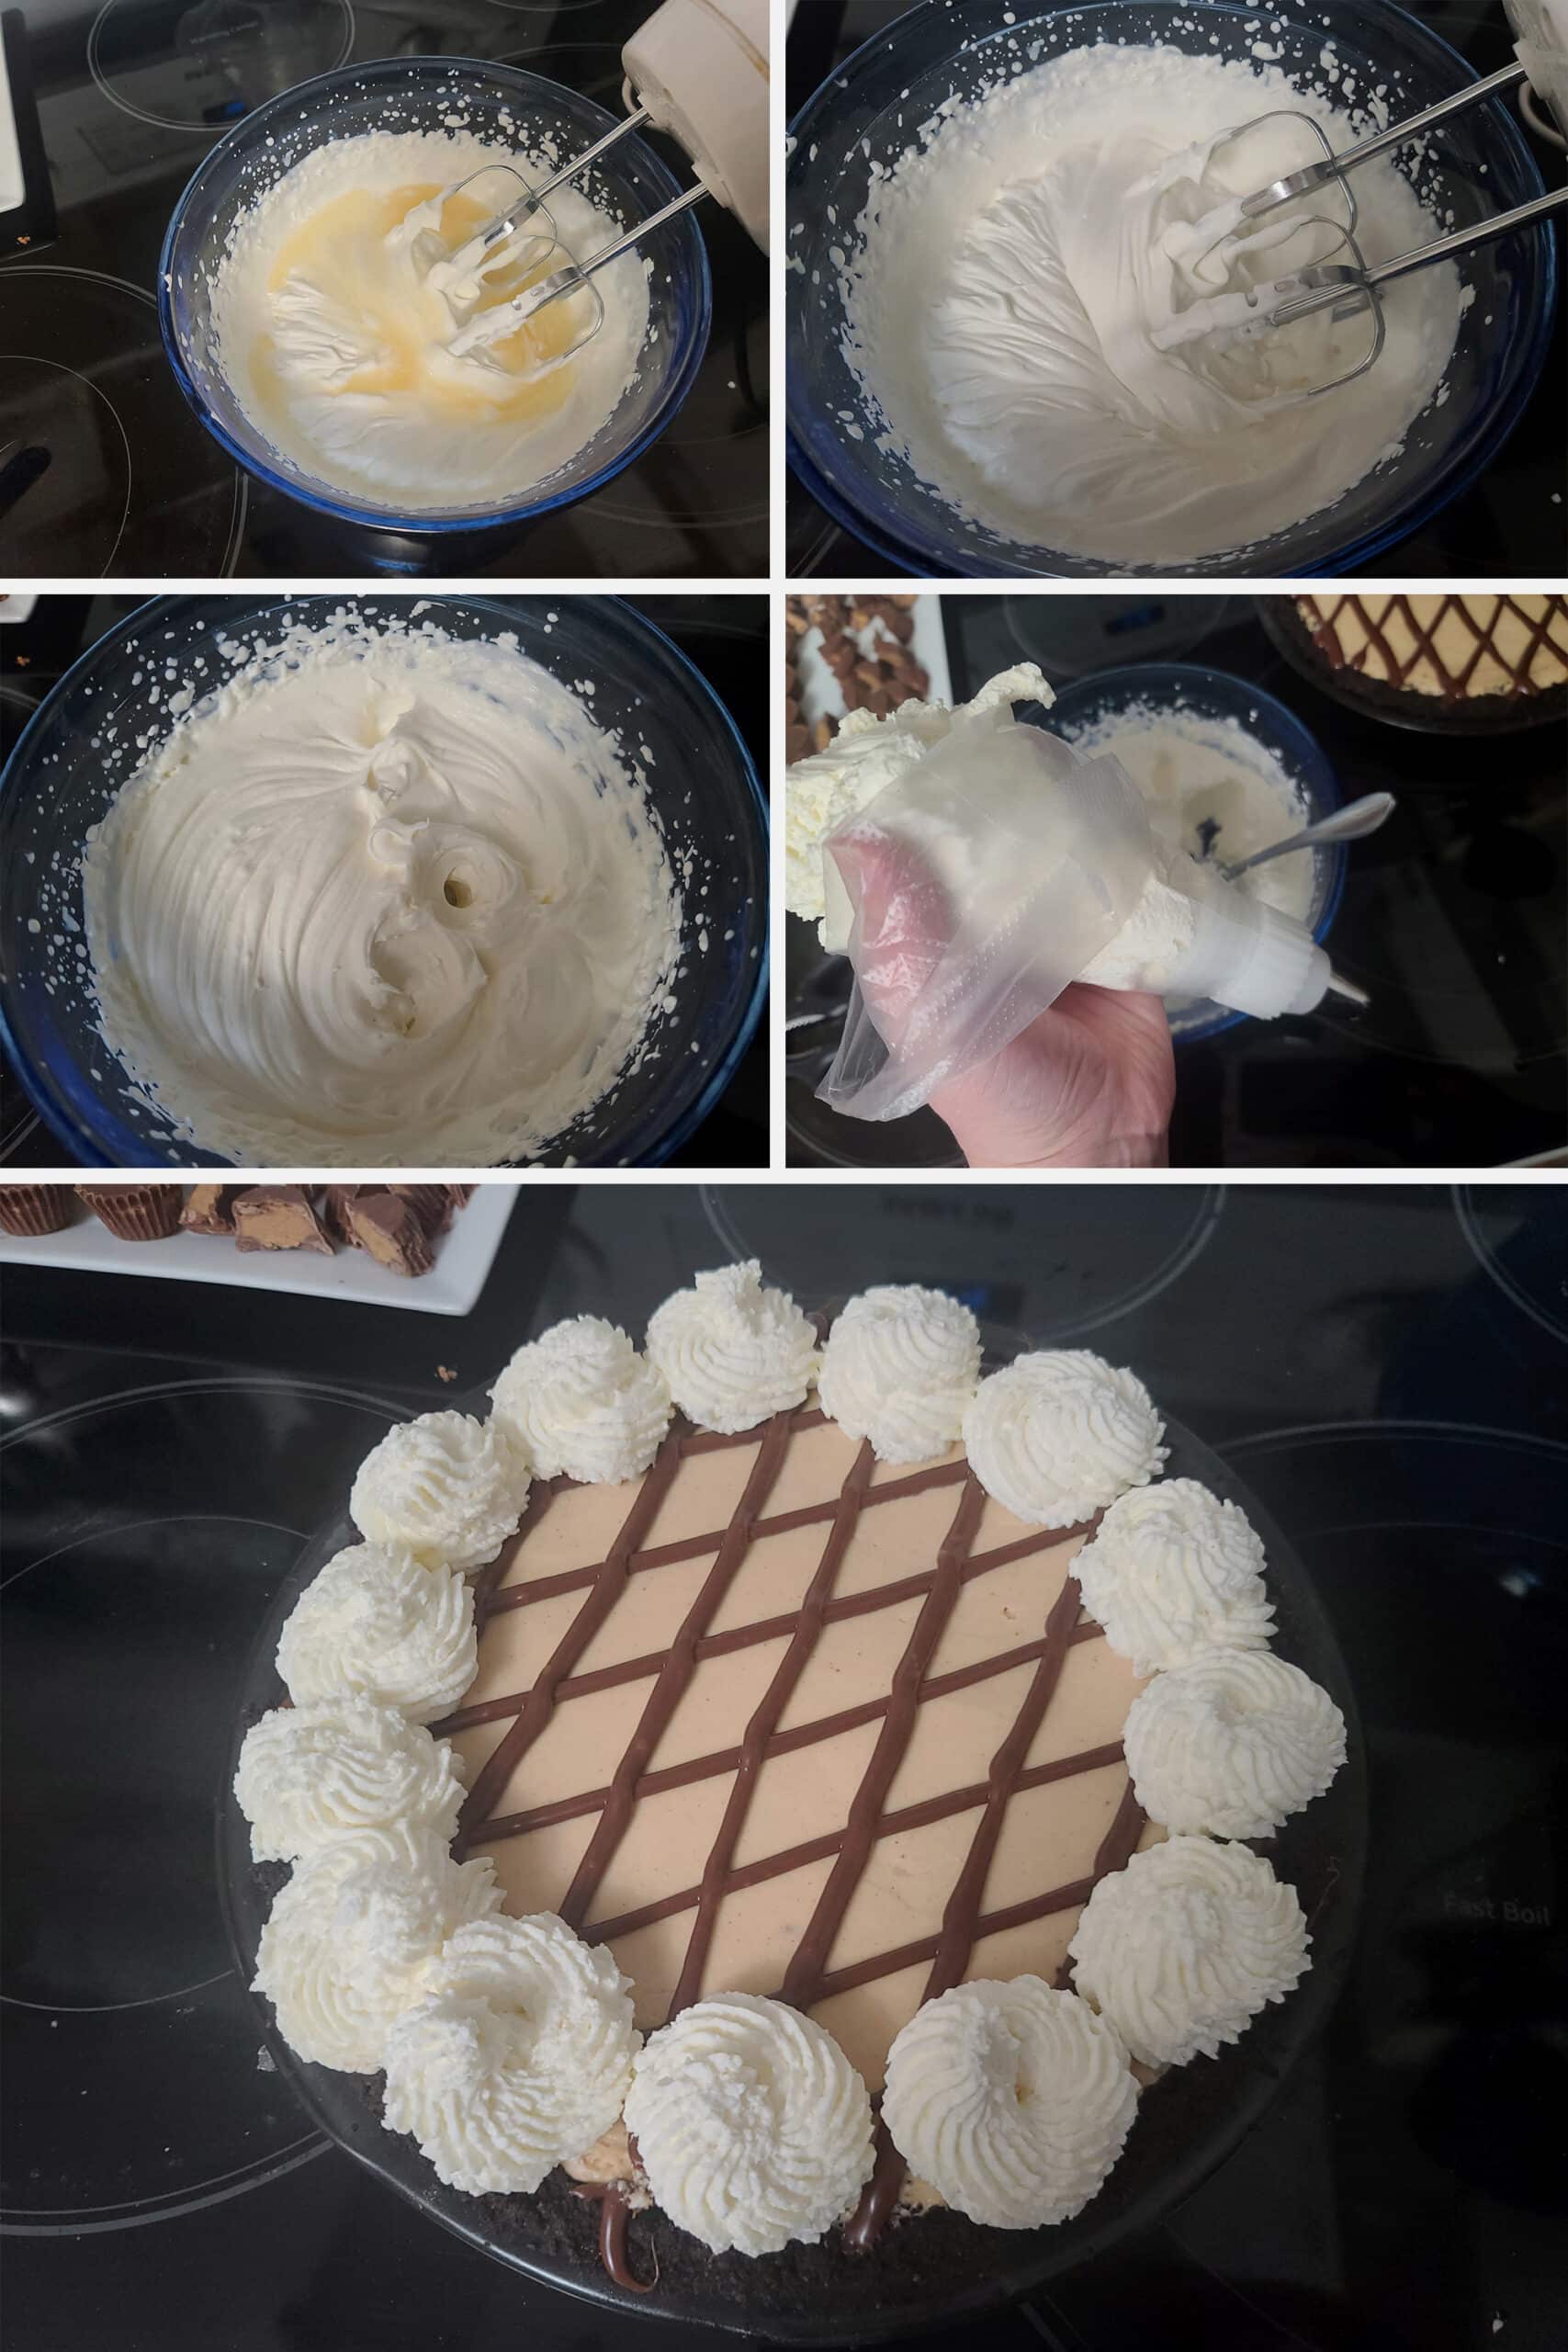 A 5 part image showing the gelatin being added to the whipped cream, then the whipped cream being piped in rosettes around the edge of the pie.